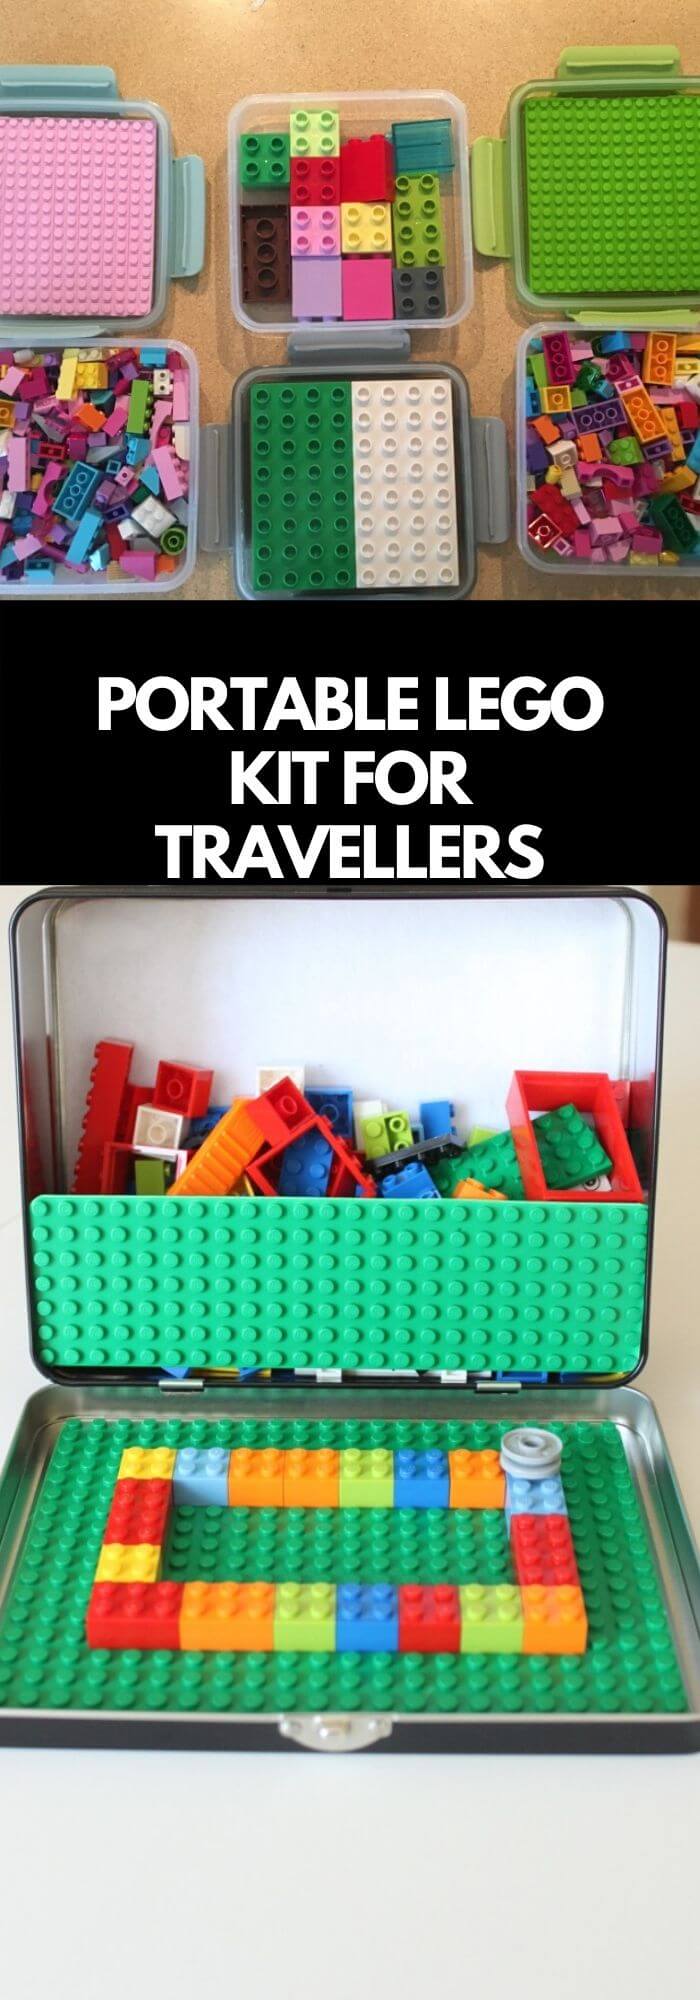 Turn travel into a blast with this portable Lego kit